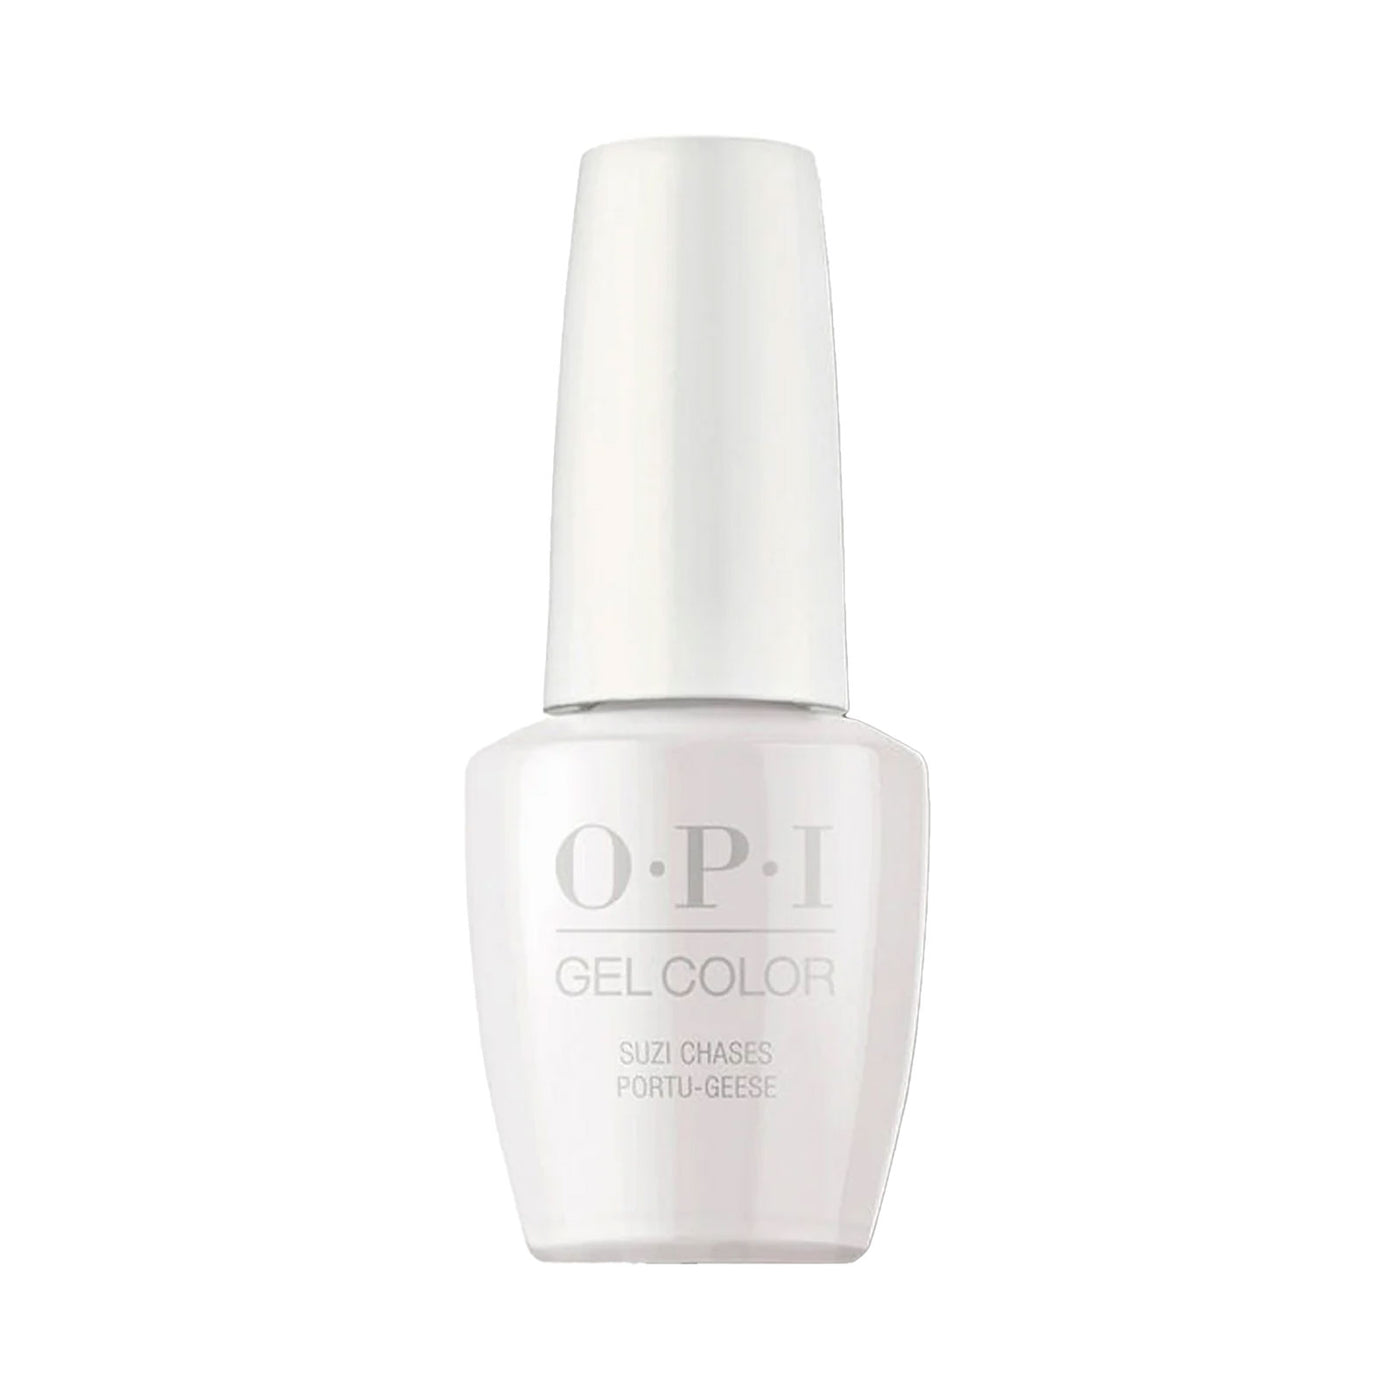 OPI GelColor GCL26 Suzi Chases Portu-geese 15ml